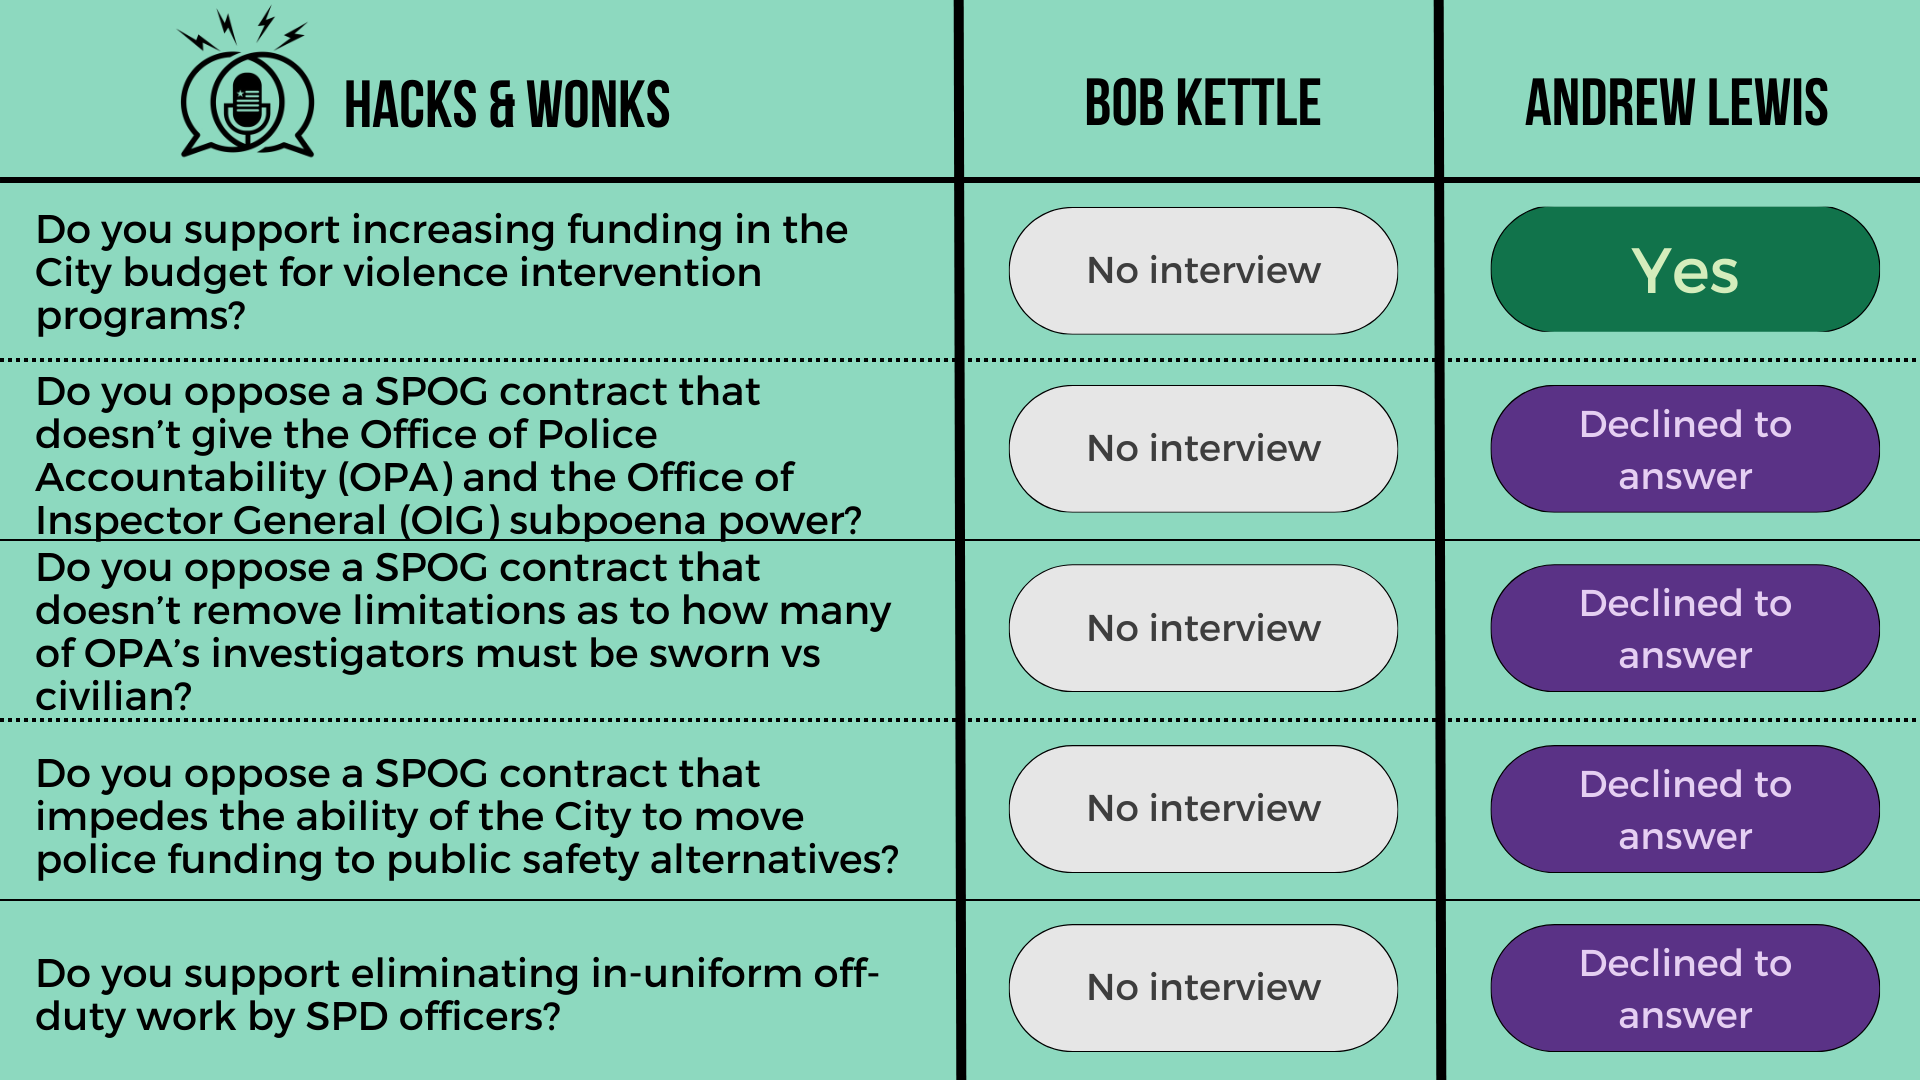 Q: Do you support increasing funding in the City budget for violence intervention programs? Bob Kettle: No interview, Andrew Lewis: Yes  Q: Do you oppose a SPOG contract that doesn’t give the Office of Police Accountability (OPA) and the Office of In